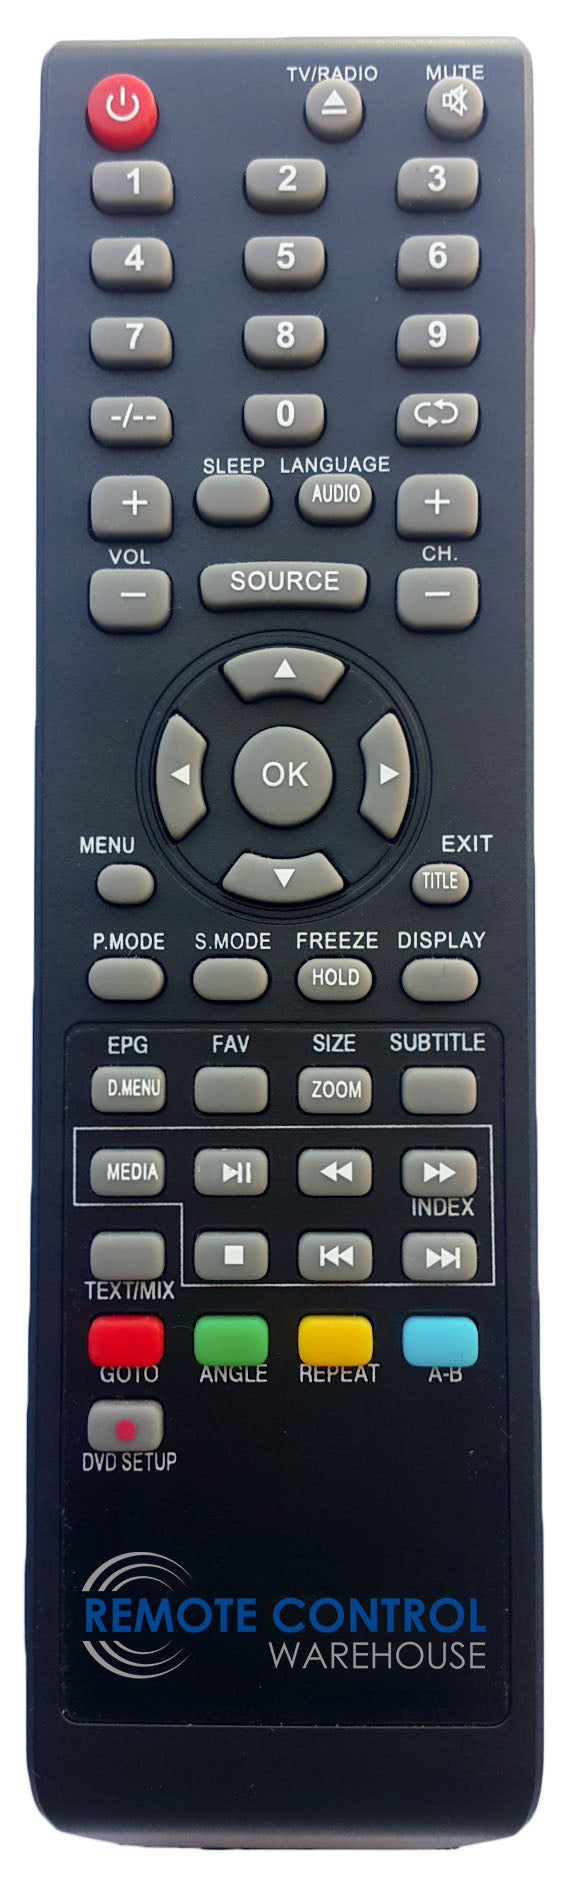 REPLACEMENT VIVID REMOTE CONTROL - AT-32HDC1 AT32HDC1 LCD TV - Remote Control Warehouse